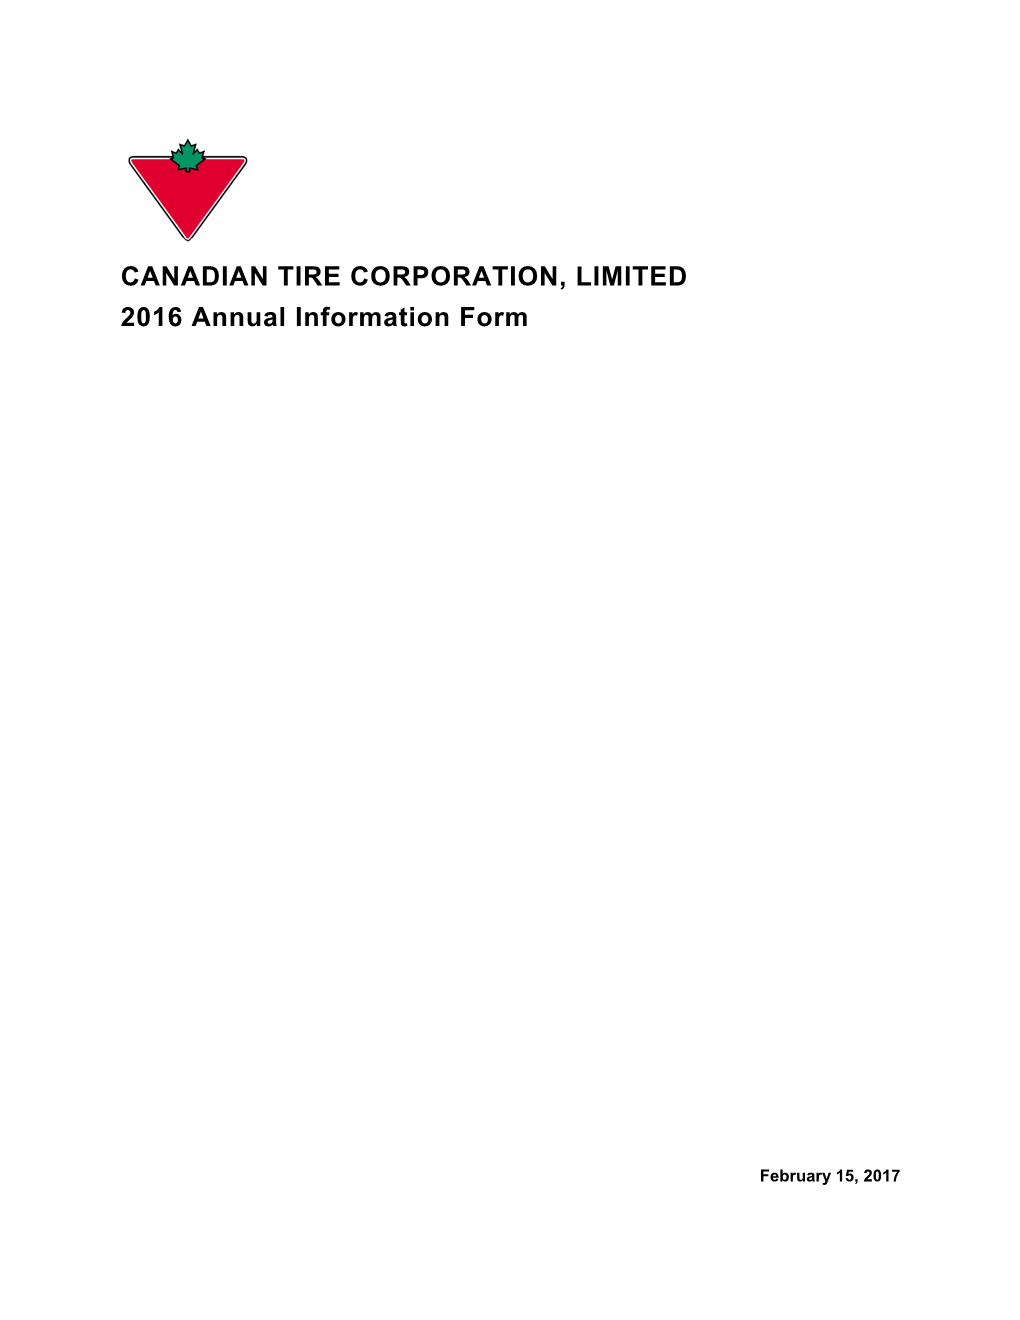 CANADIAN TIRE CORPORATION, LIMITED 2016 Annual Information Form